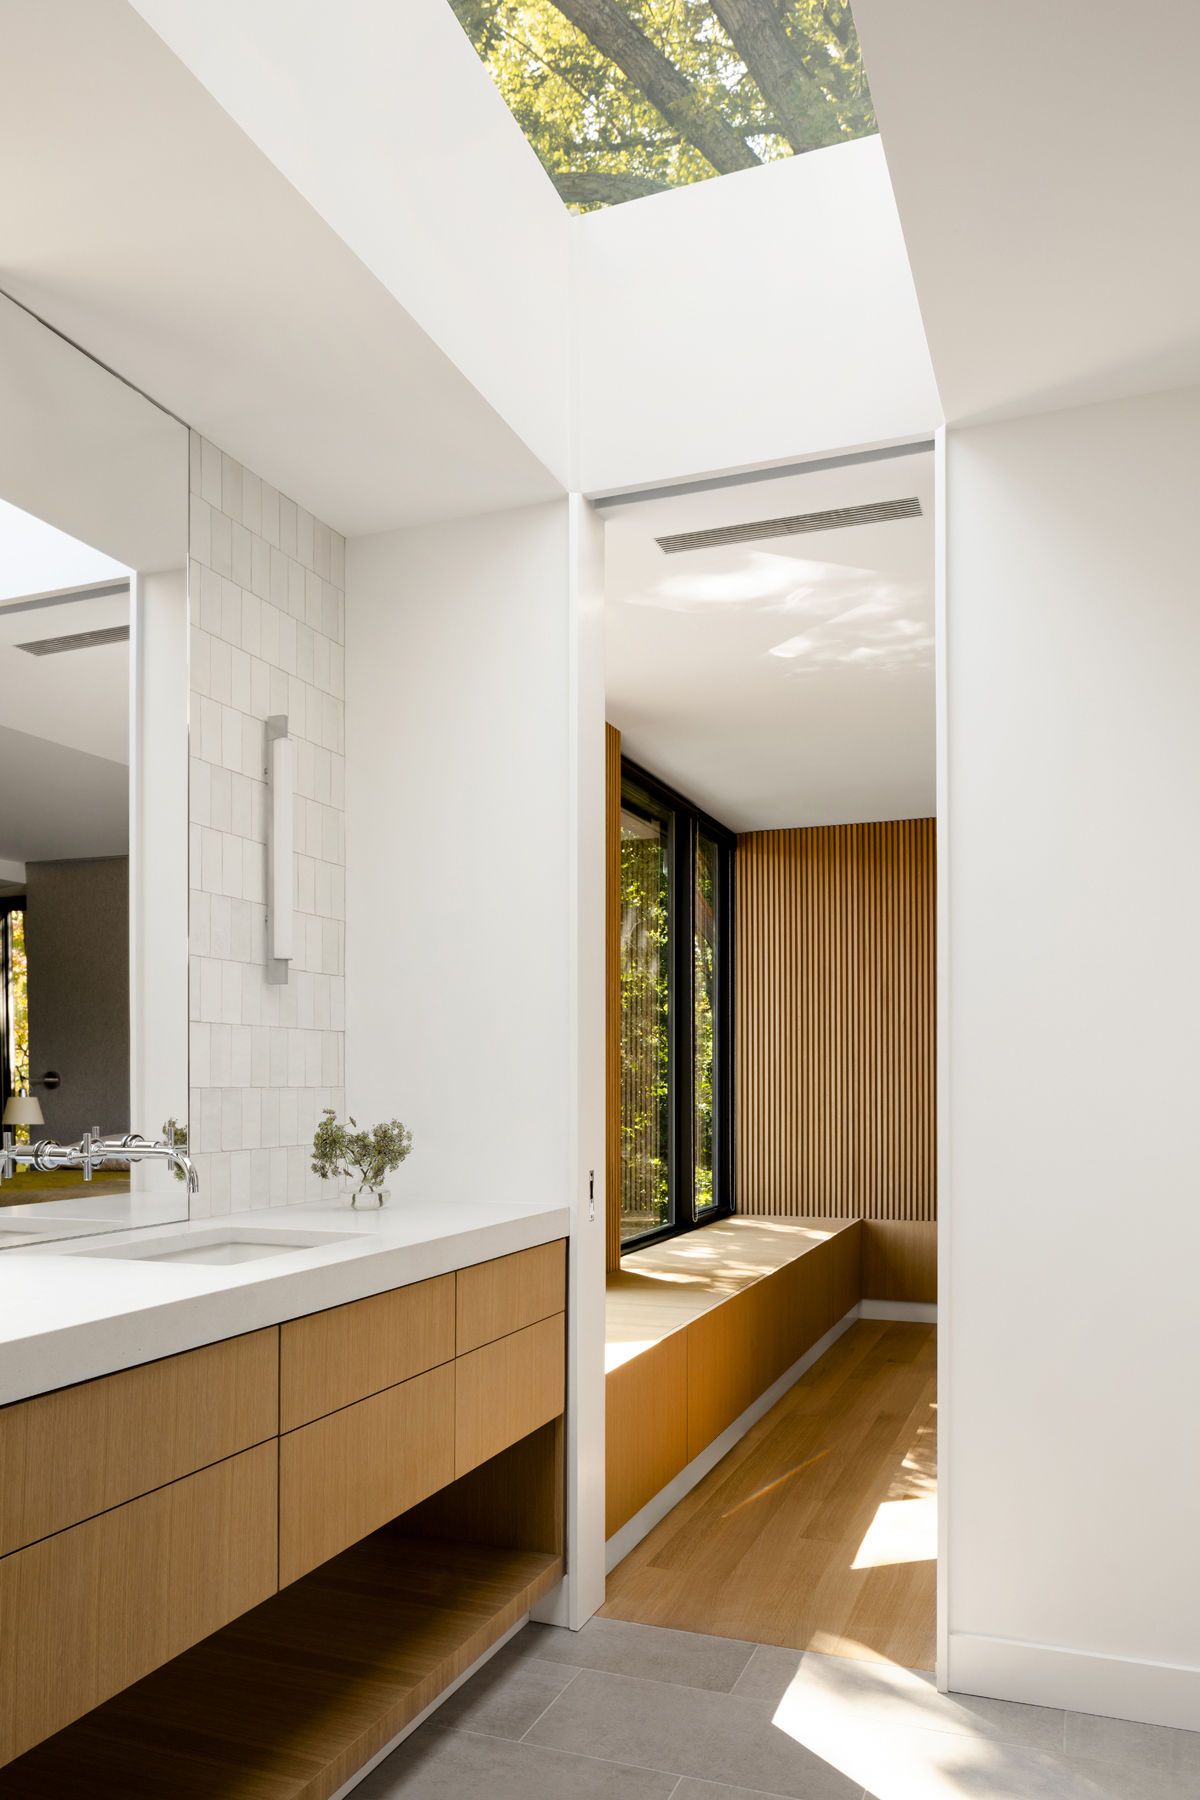 Renovated bathroom with large skylight and warm wood cabinetry